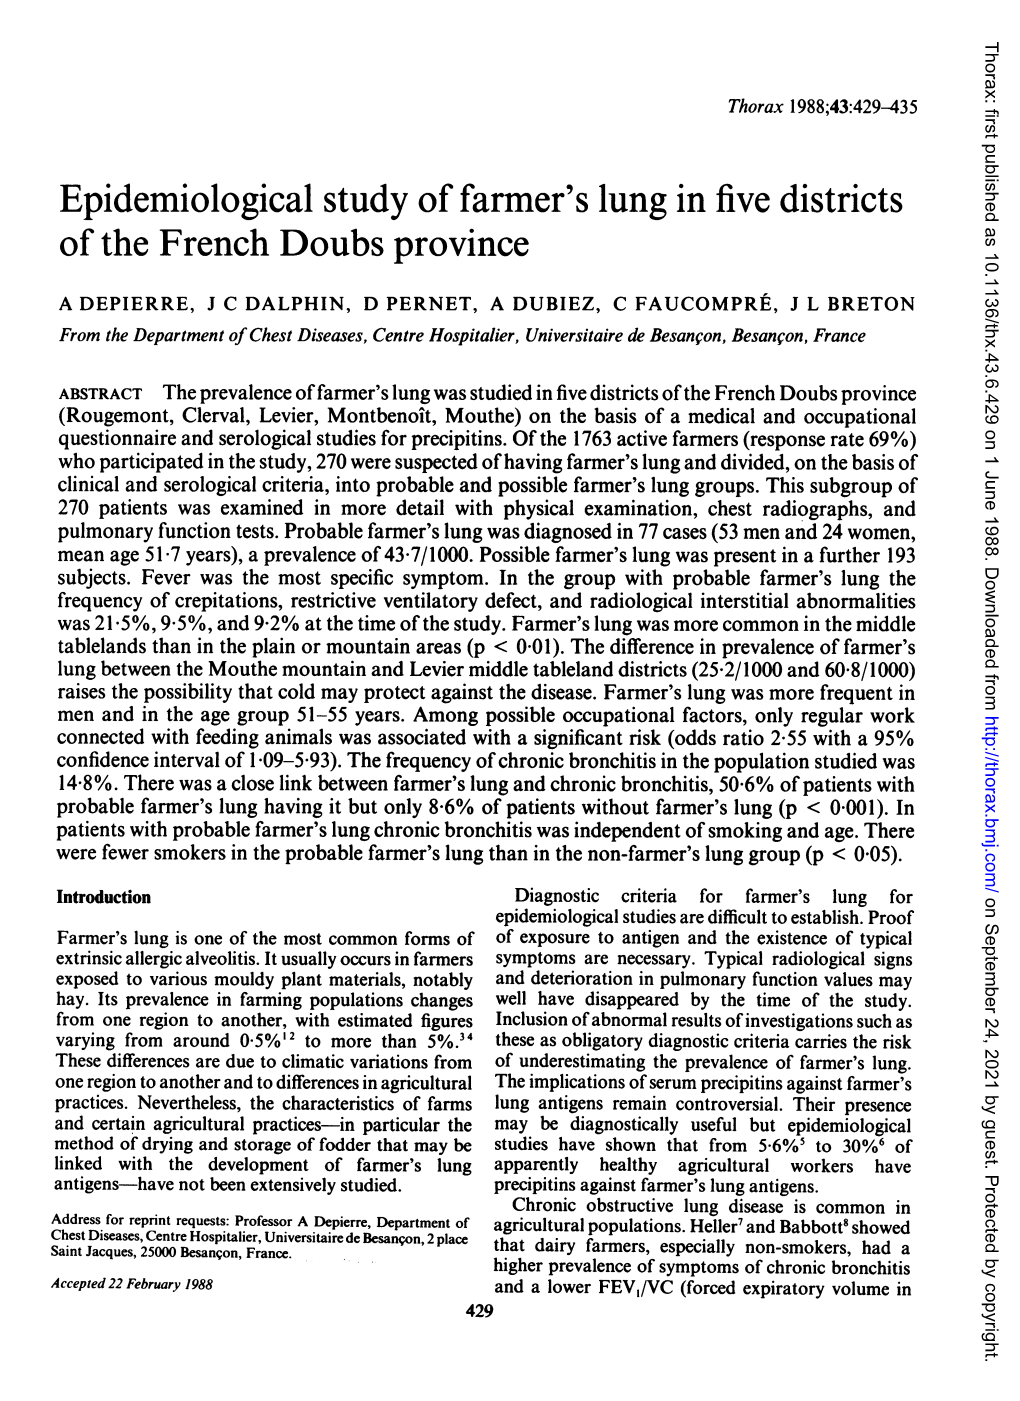 Epidemiological Study of Farmer's Lung in Five Districts of the French Doubs Province